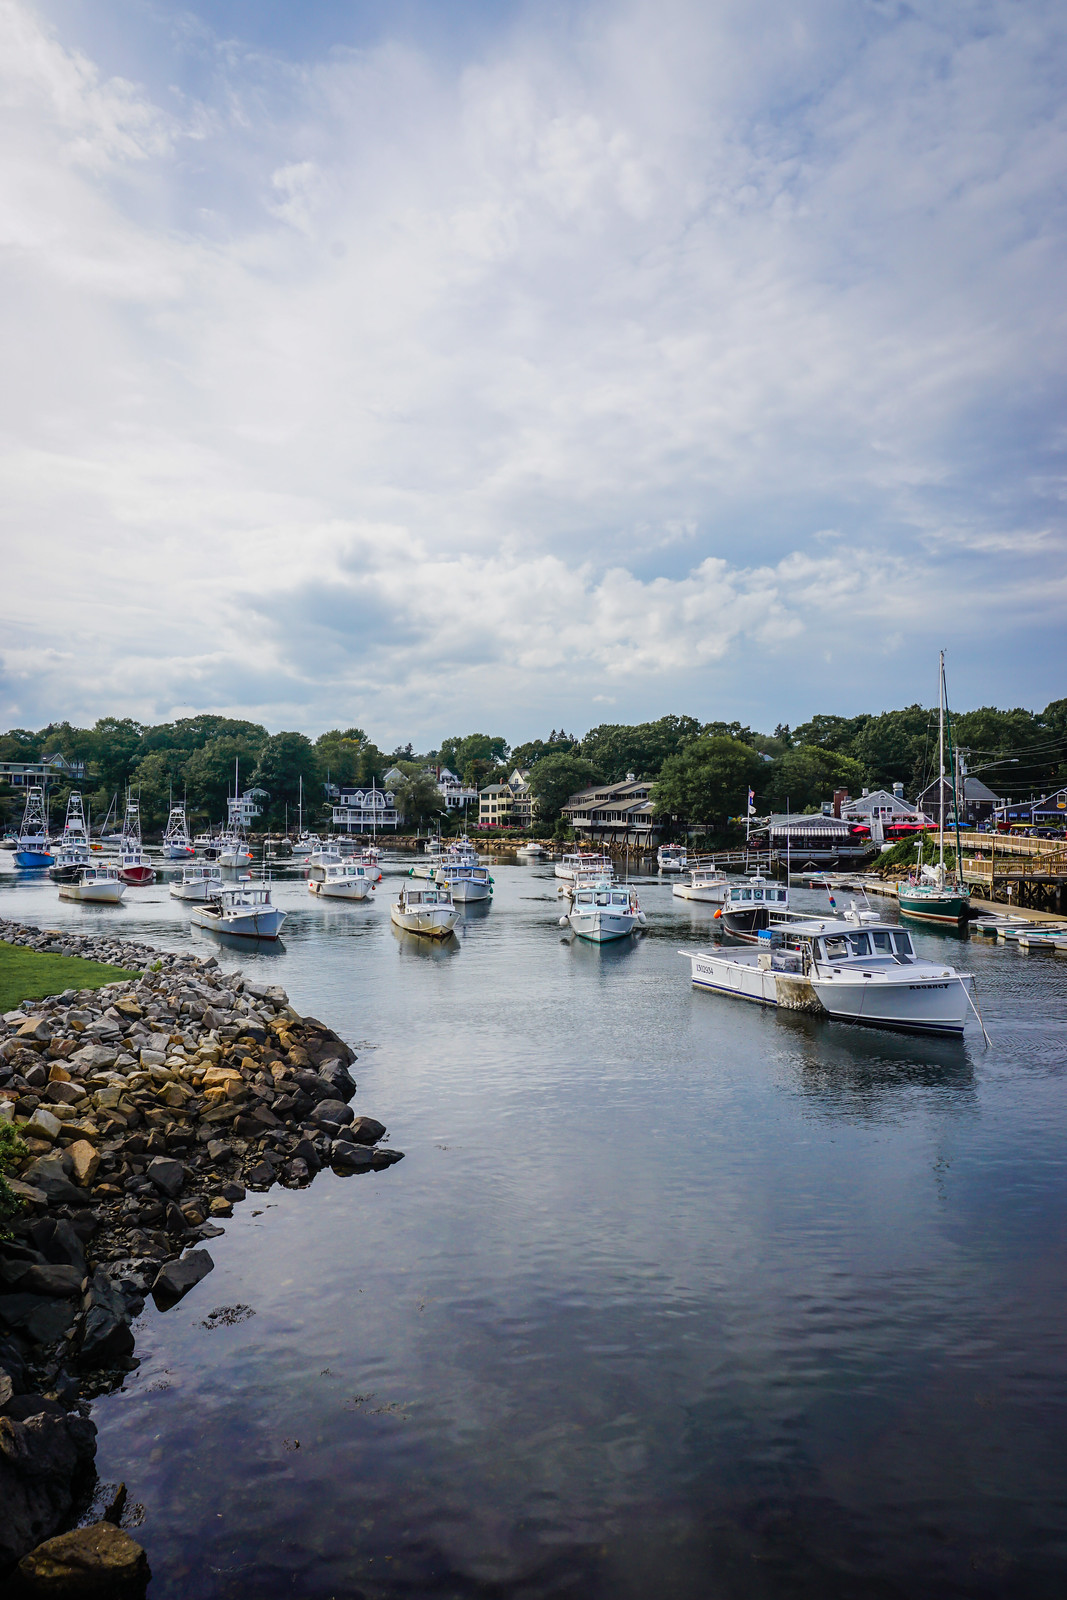 Perkins Cove in Ogunquit, Maine | New England Road Trip Itinerary - New England Road Trip - The Ultimate 7 Day Itinerary - The Perfect Summer New England Road Trip Itinerary